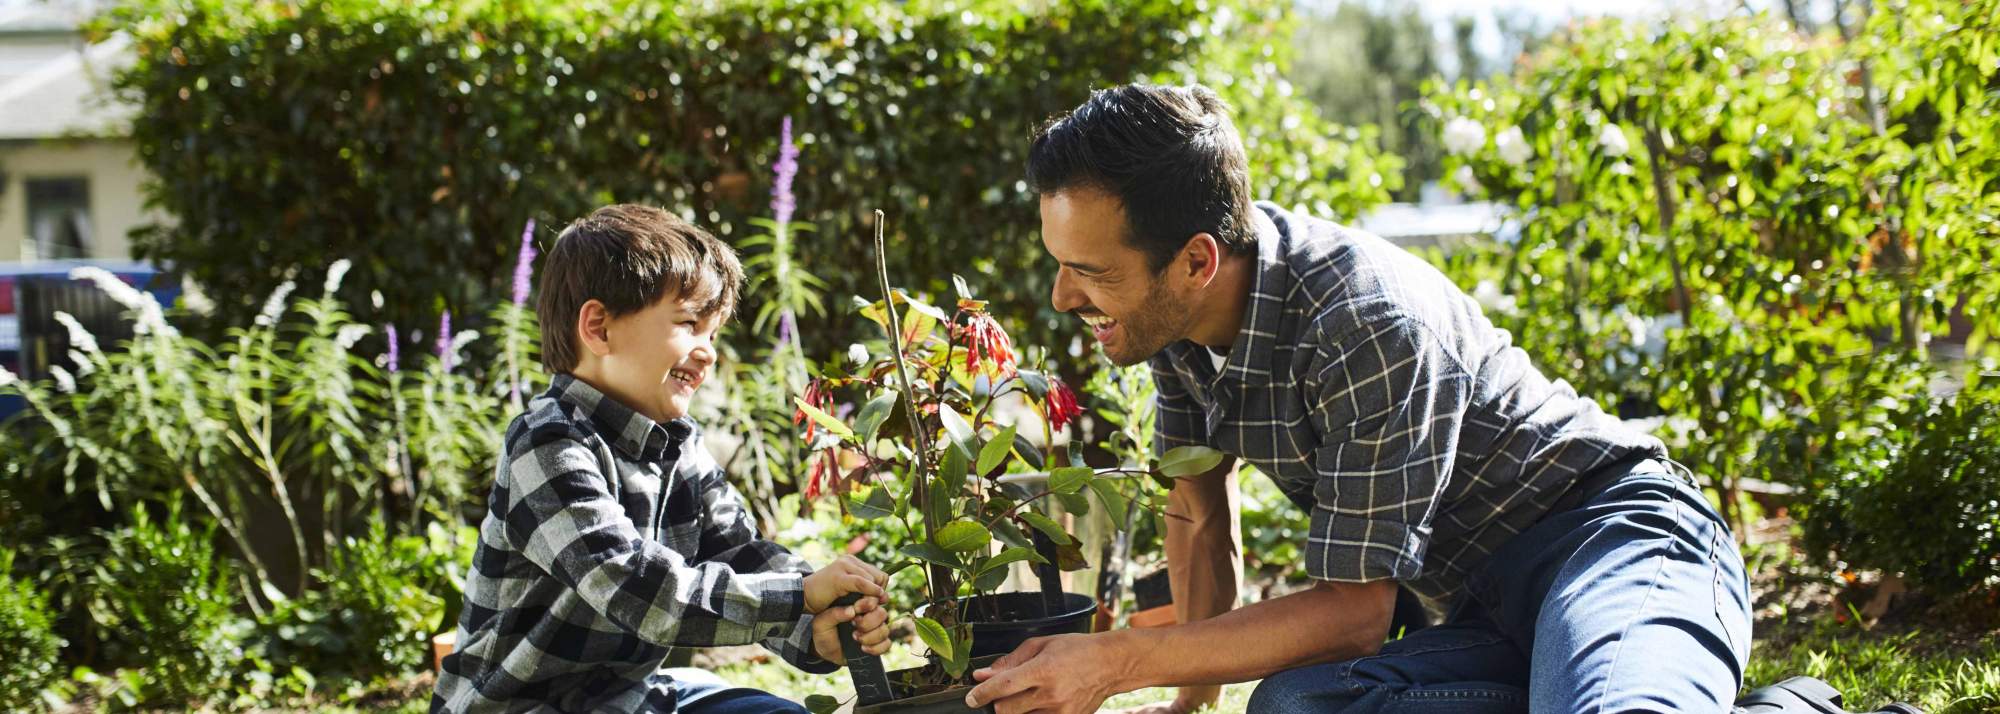 Botanical, Mickleham young father and son sitting in veggie garden.